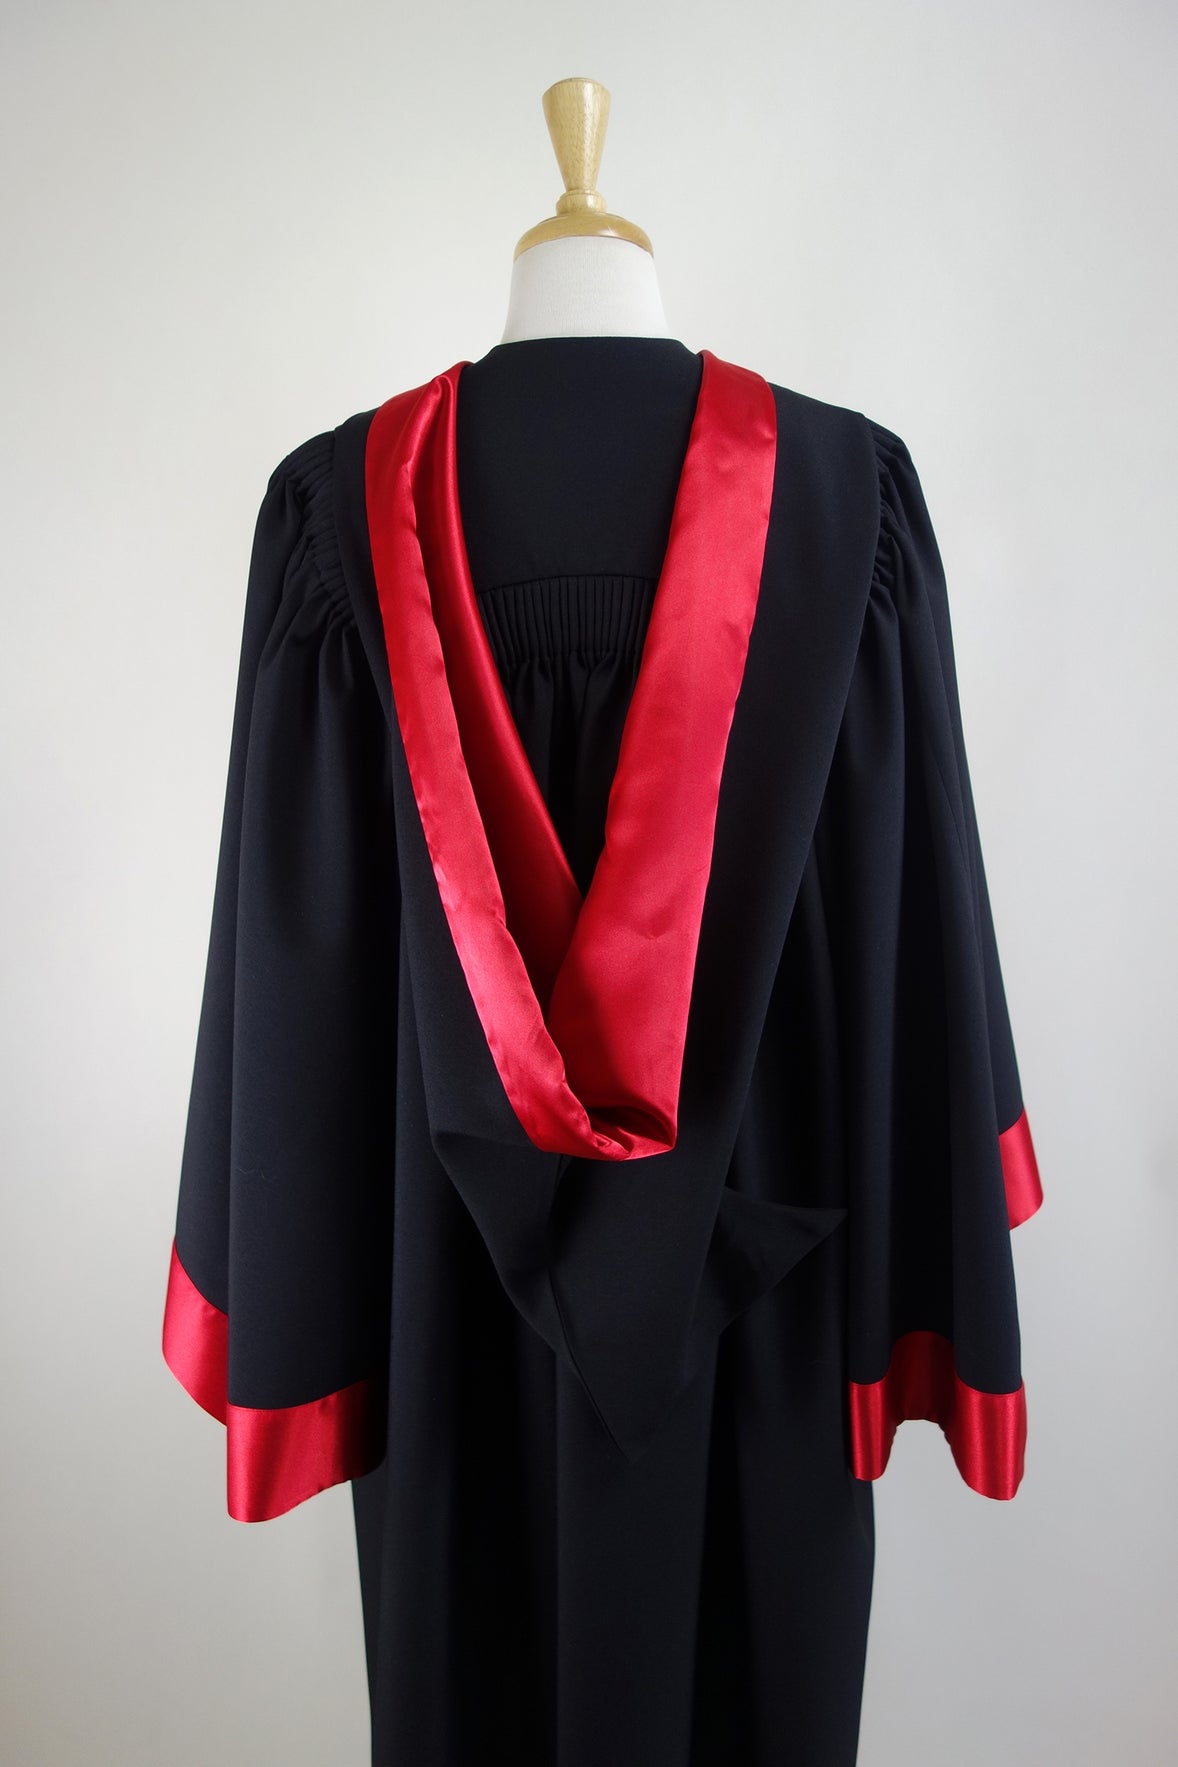 University of Divinity PhD Graduation Gown Set - Gown, Hood and Bonnet